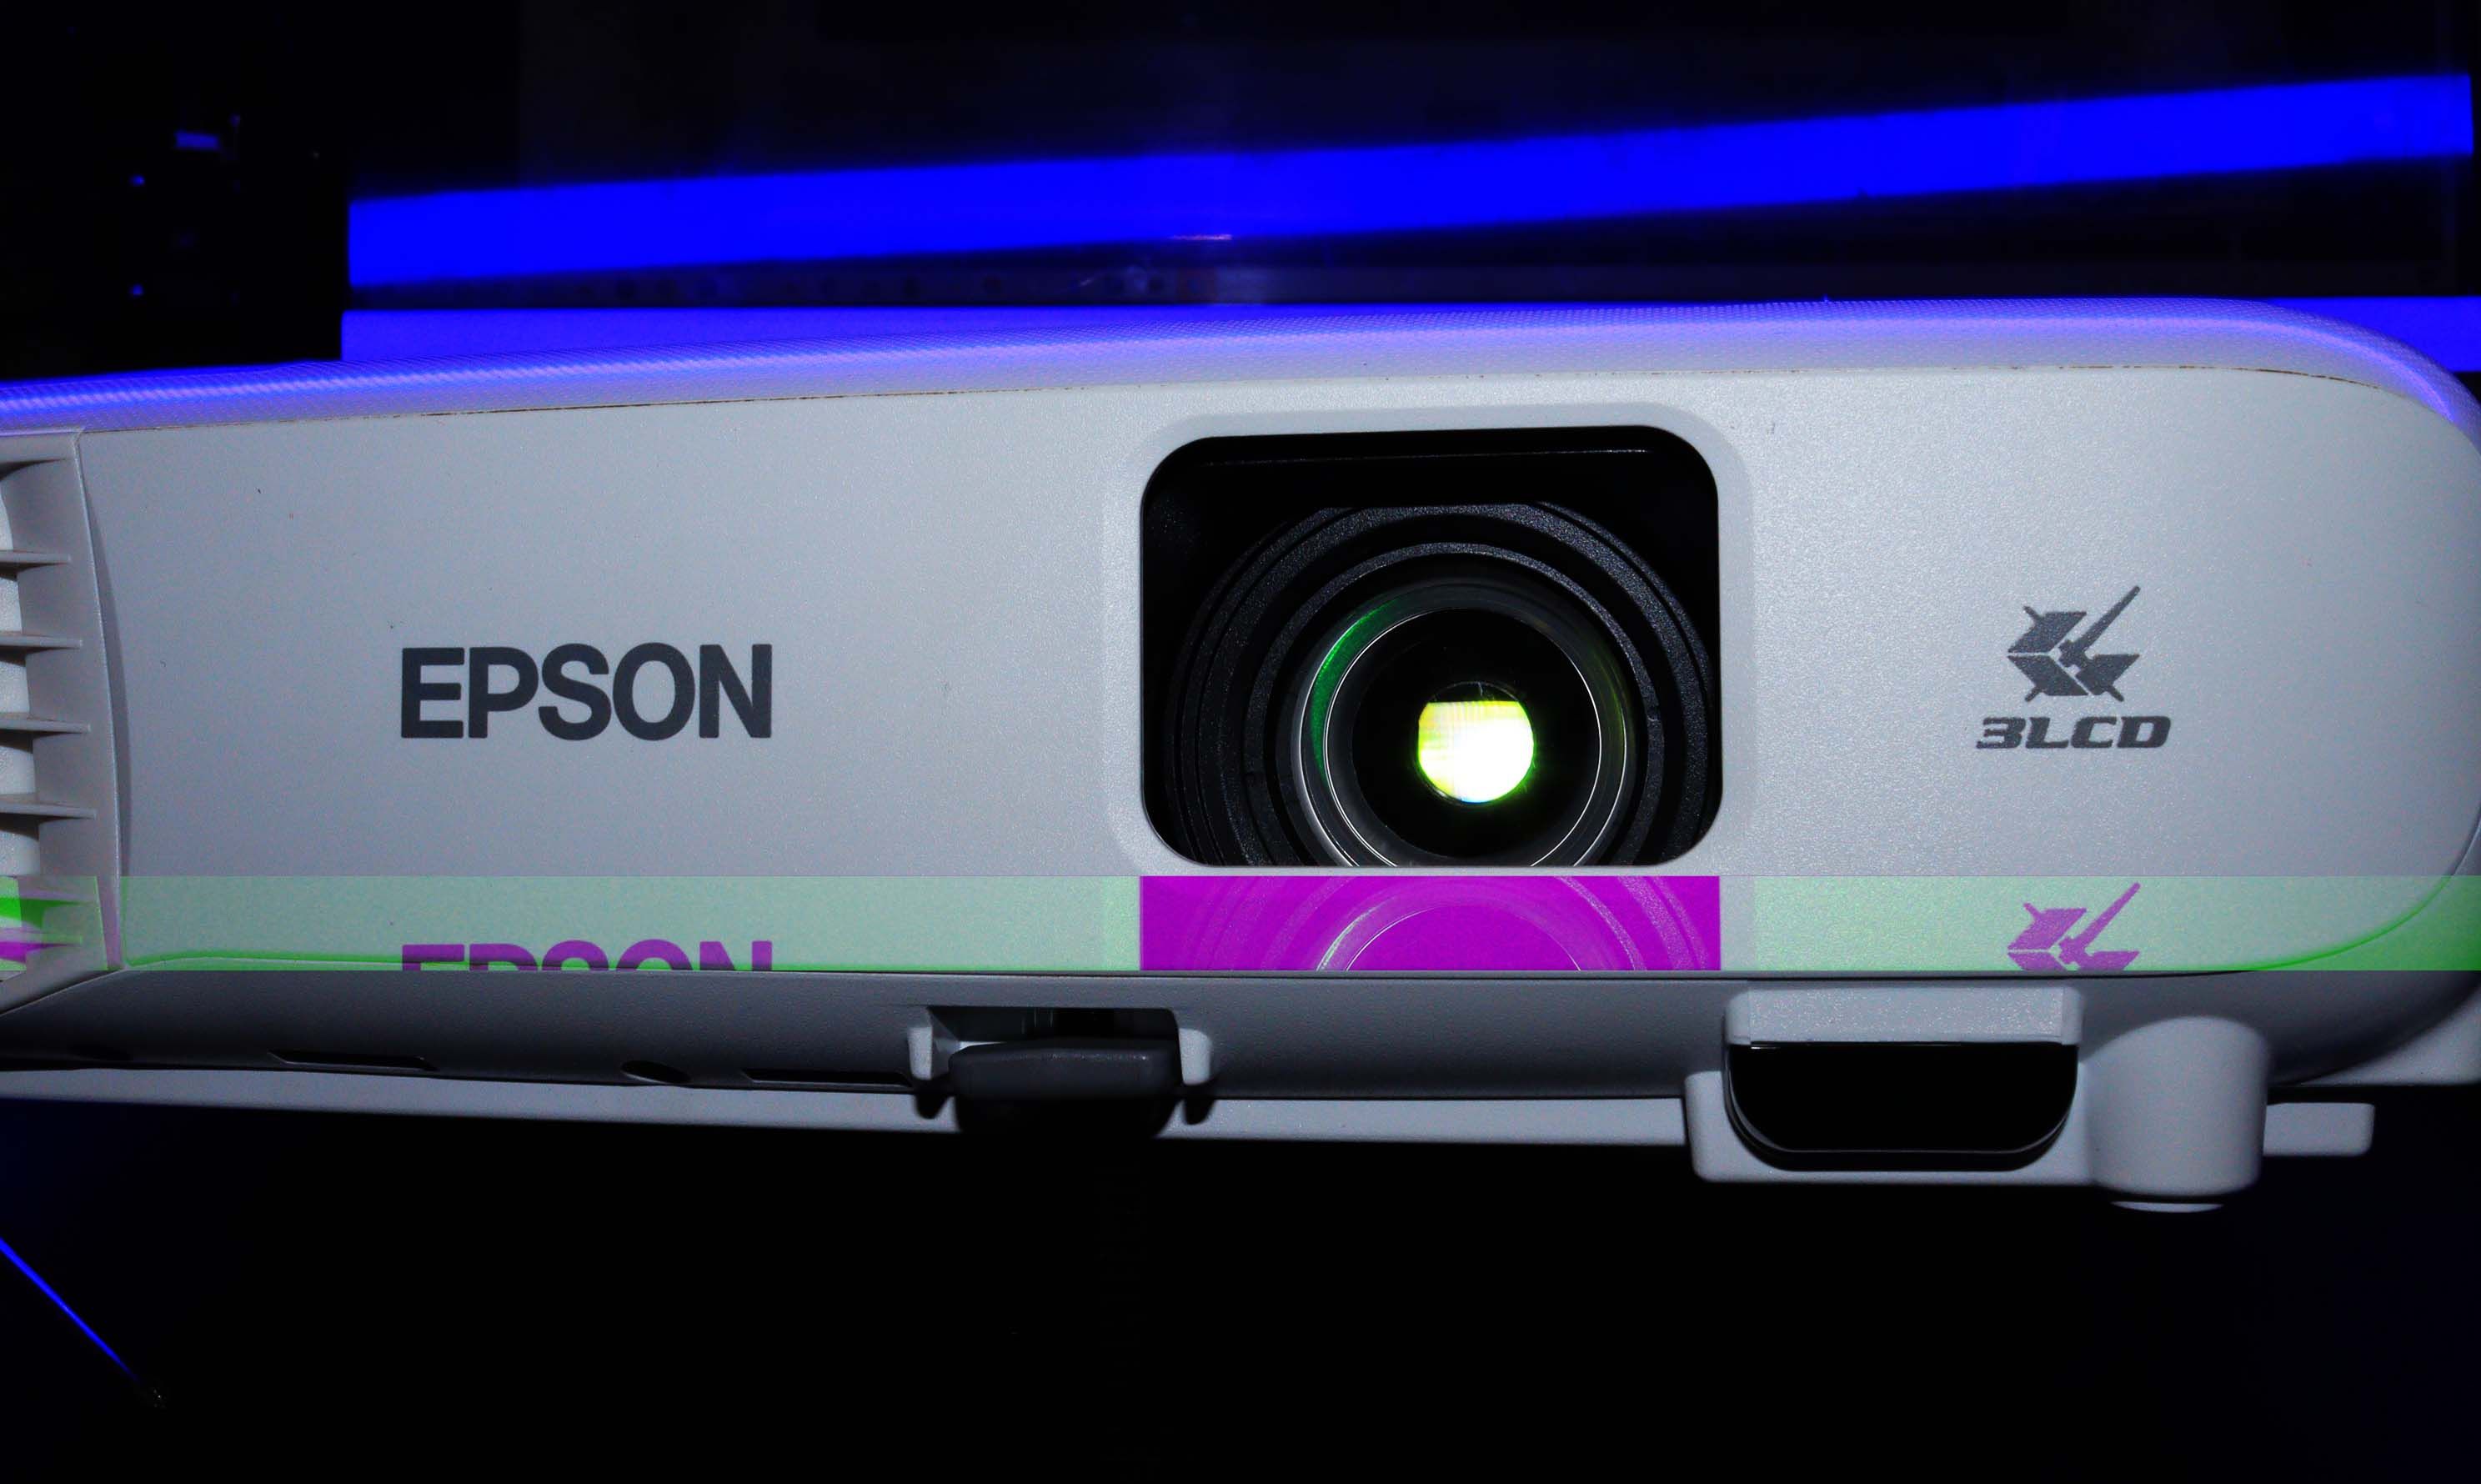 An Epson projector with blue lights on top